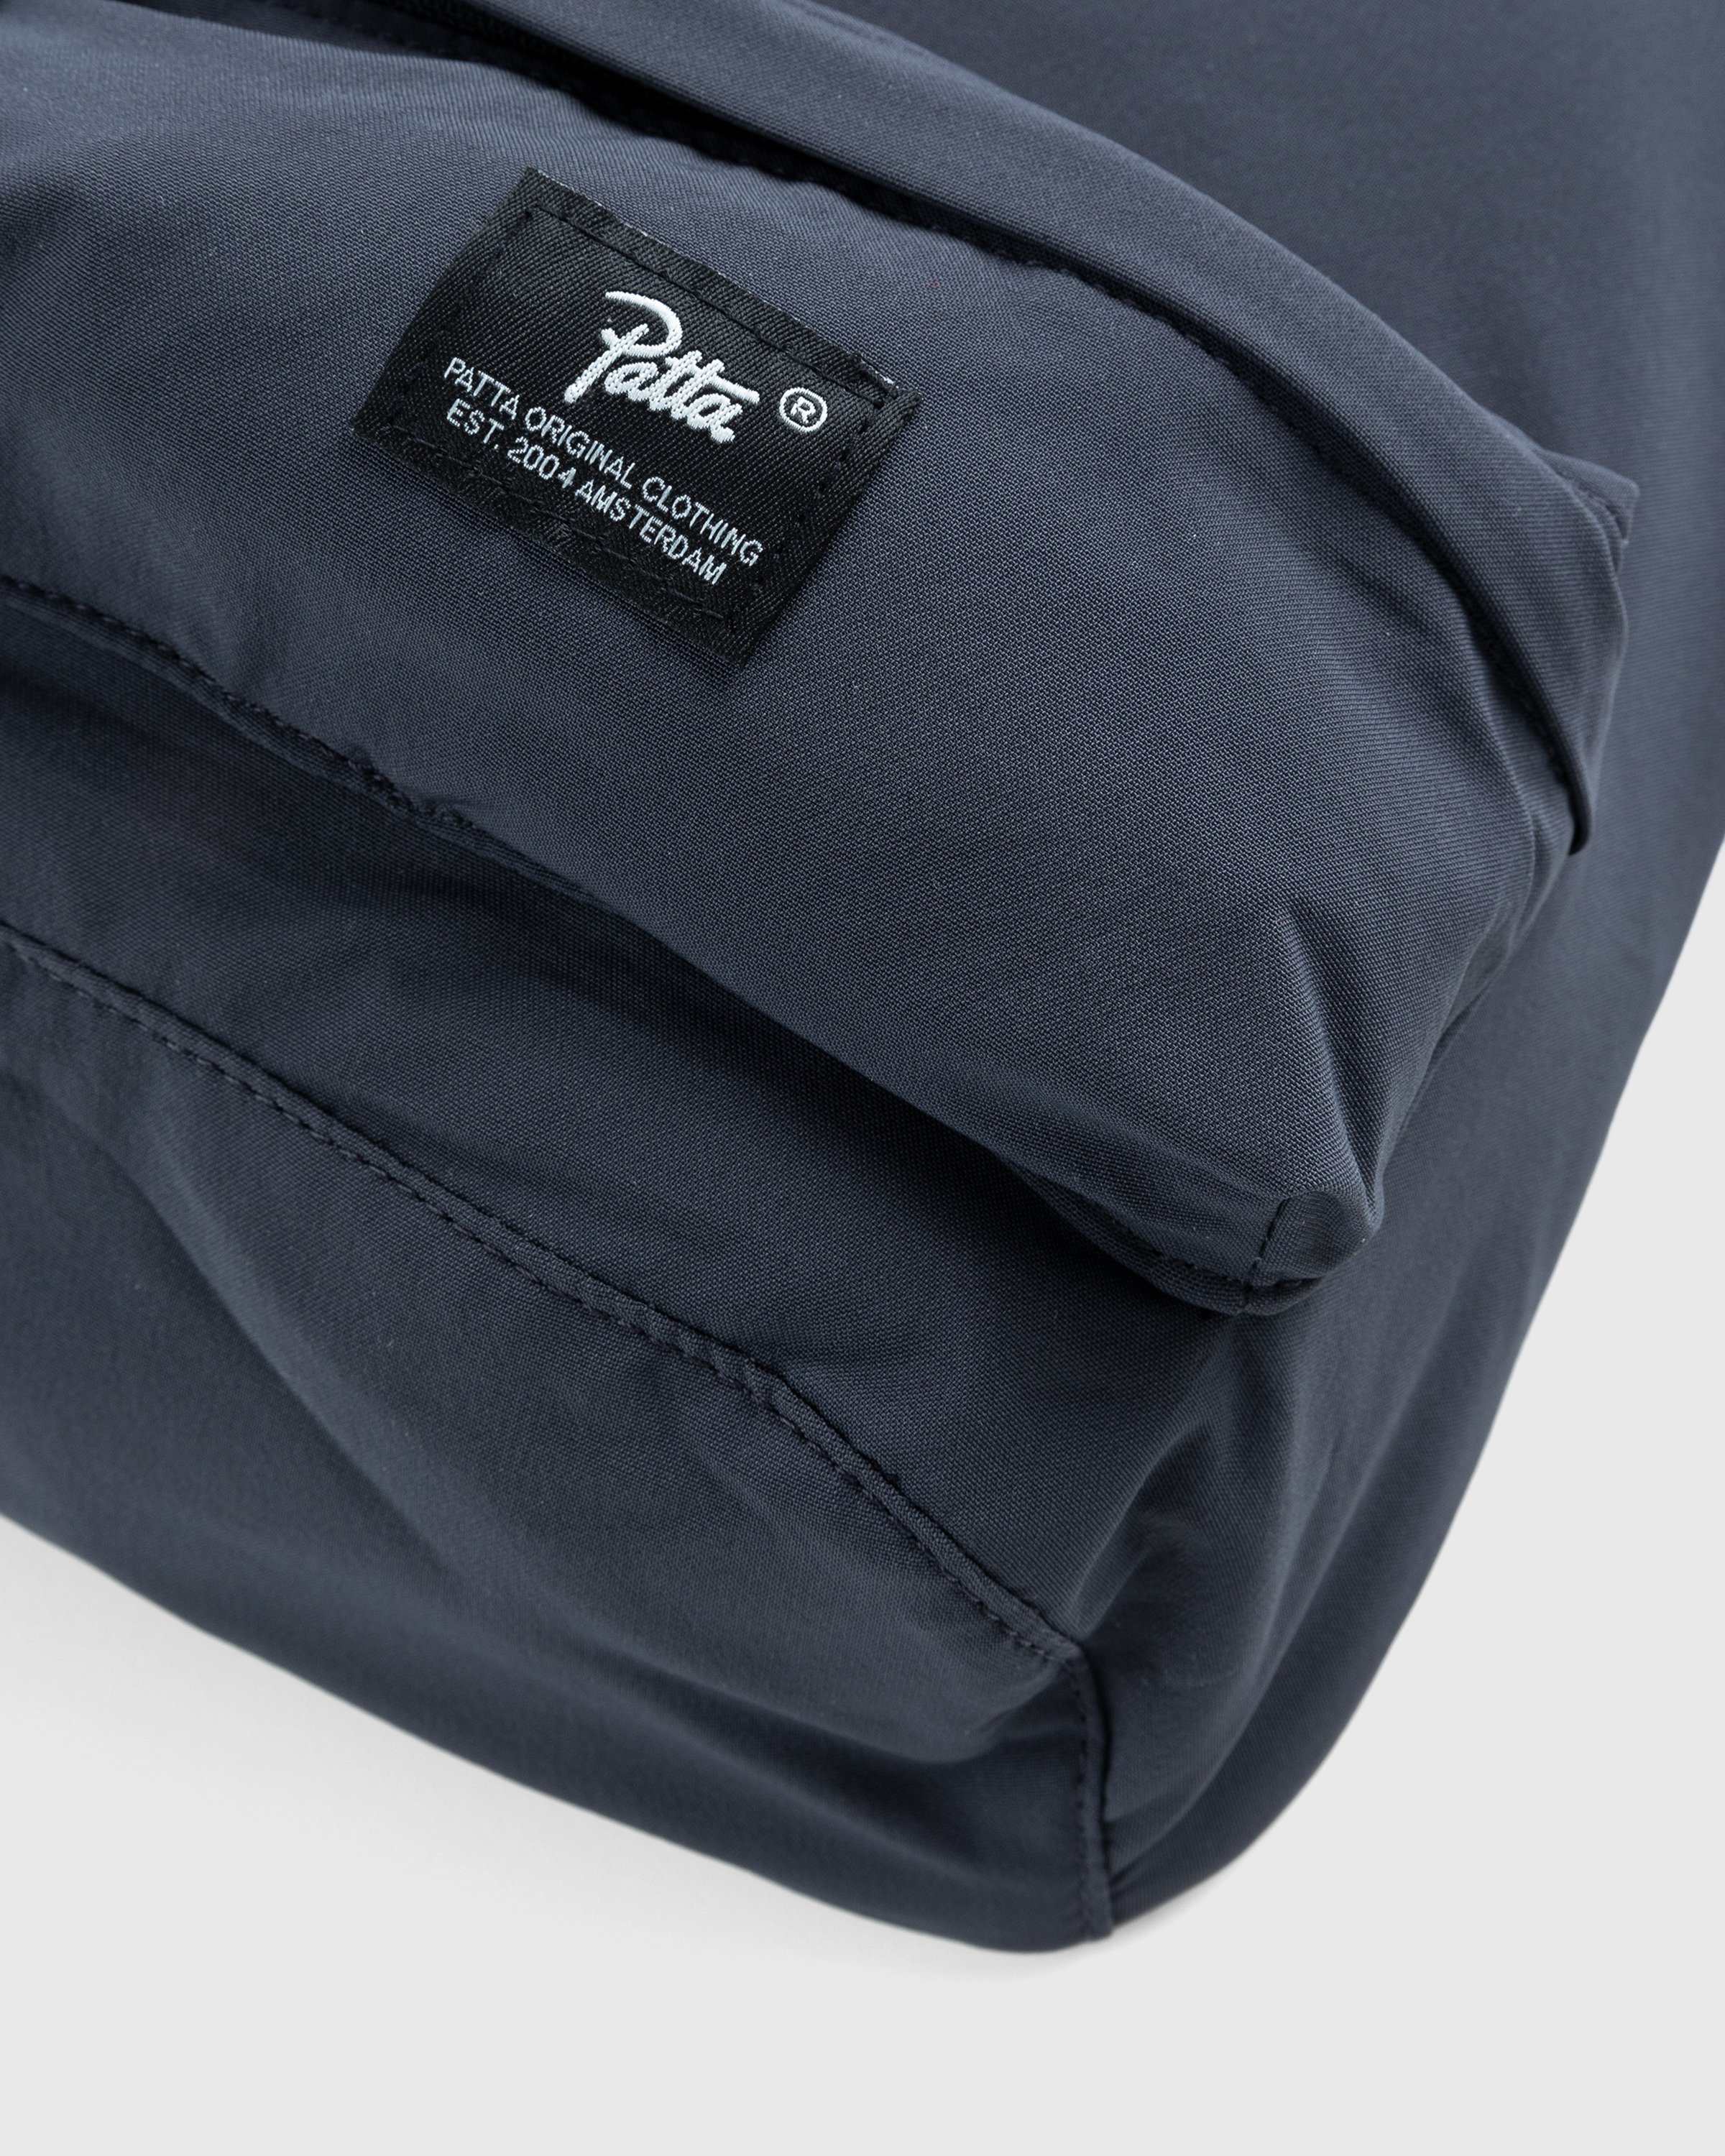 Patta - N039 Sling Bag Charcoal - Accessories - Grey - Image 7